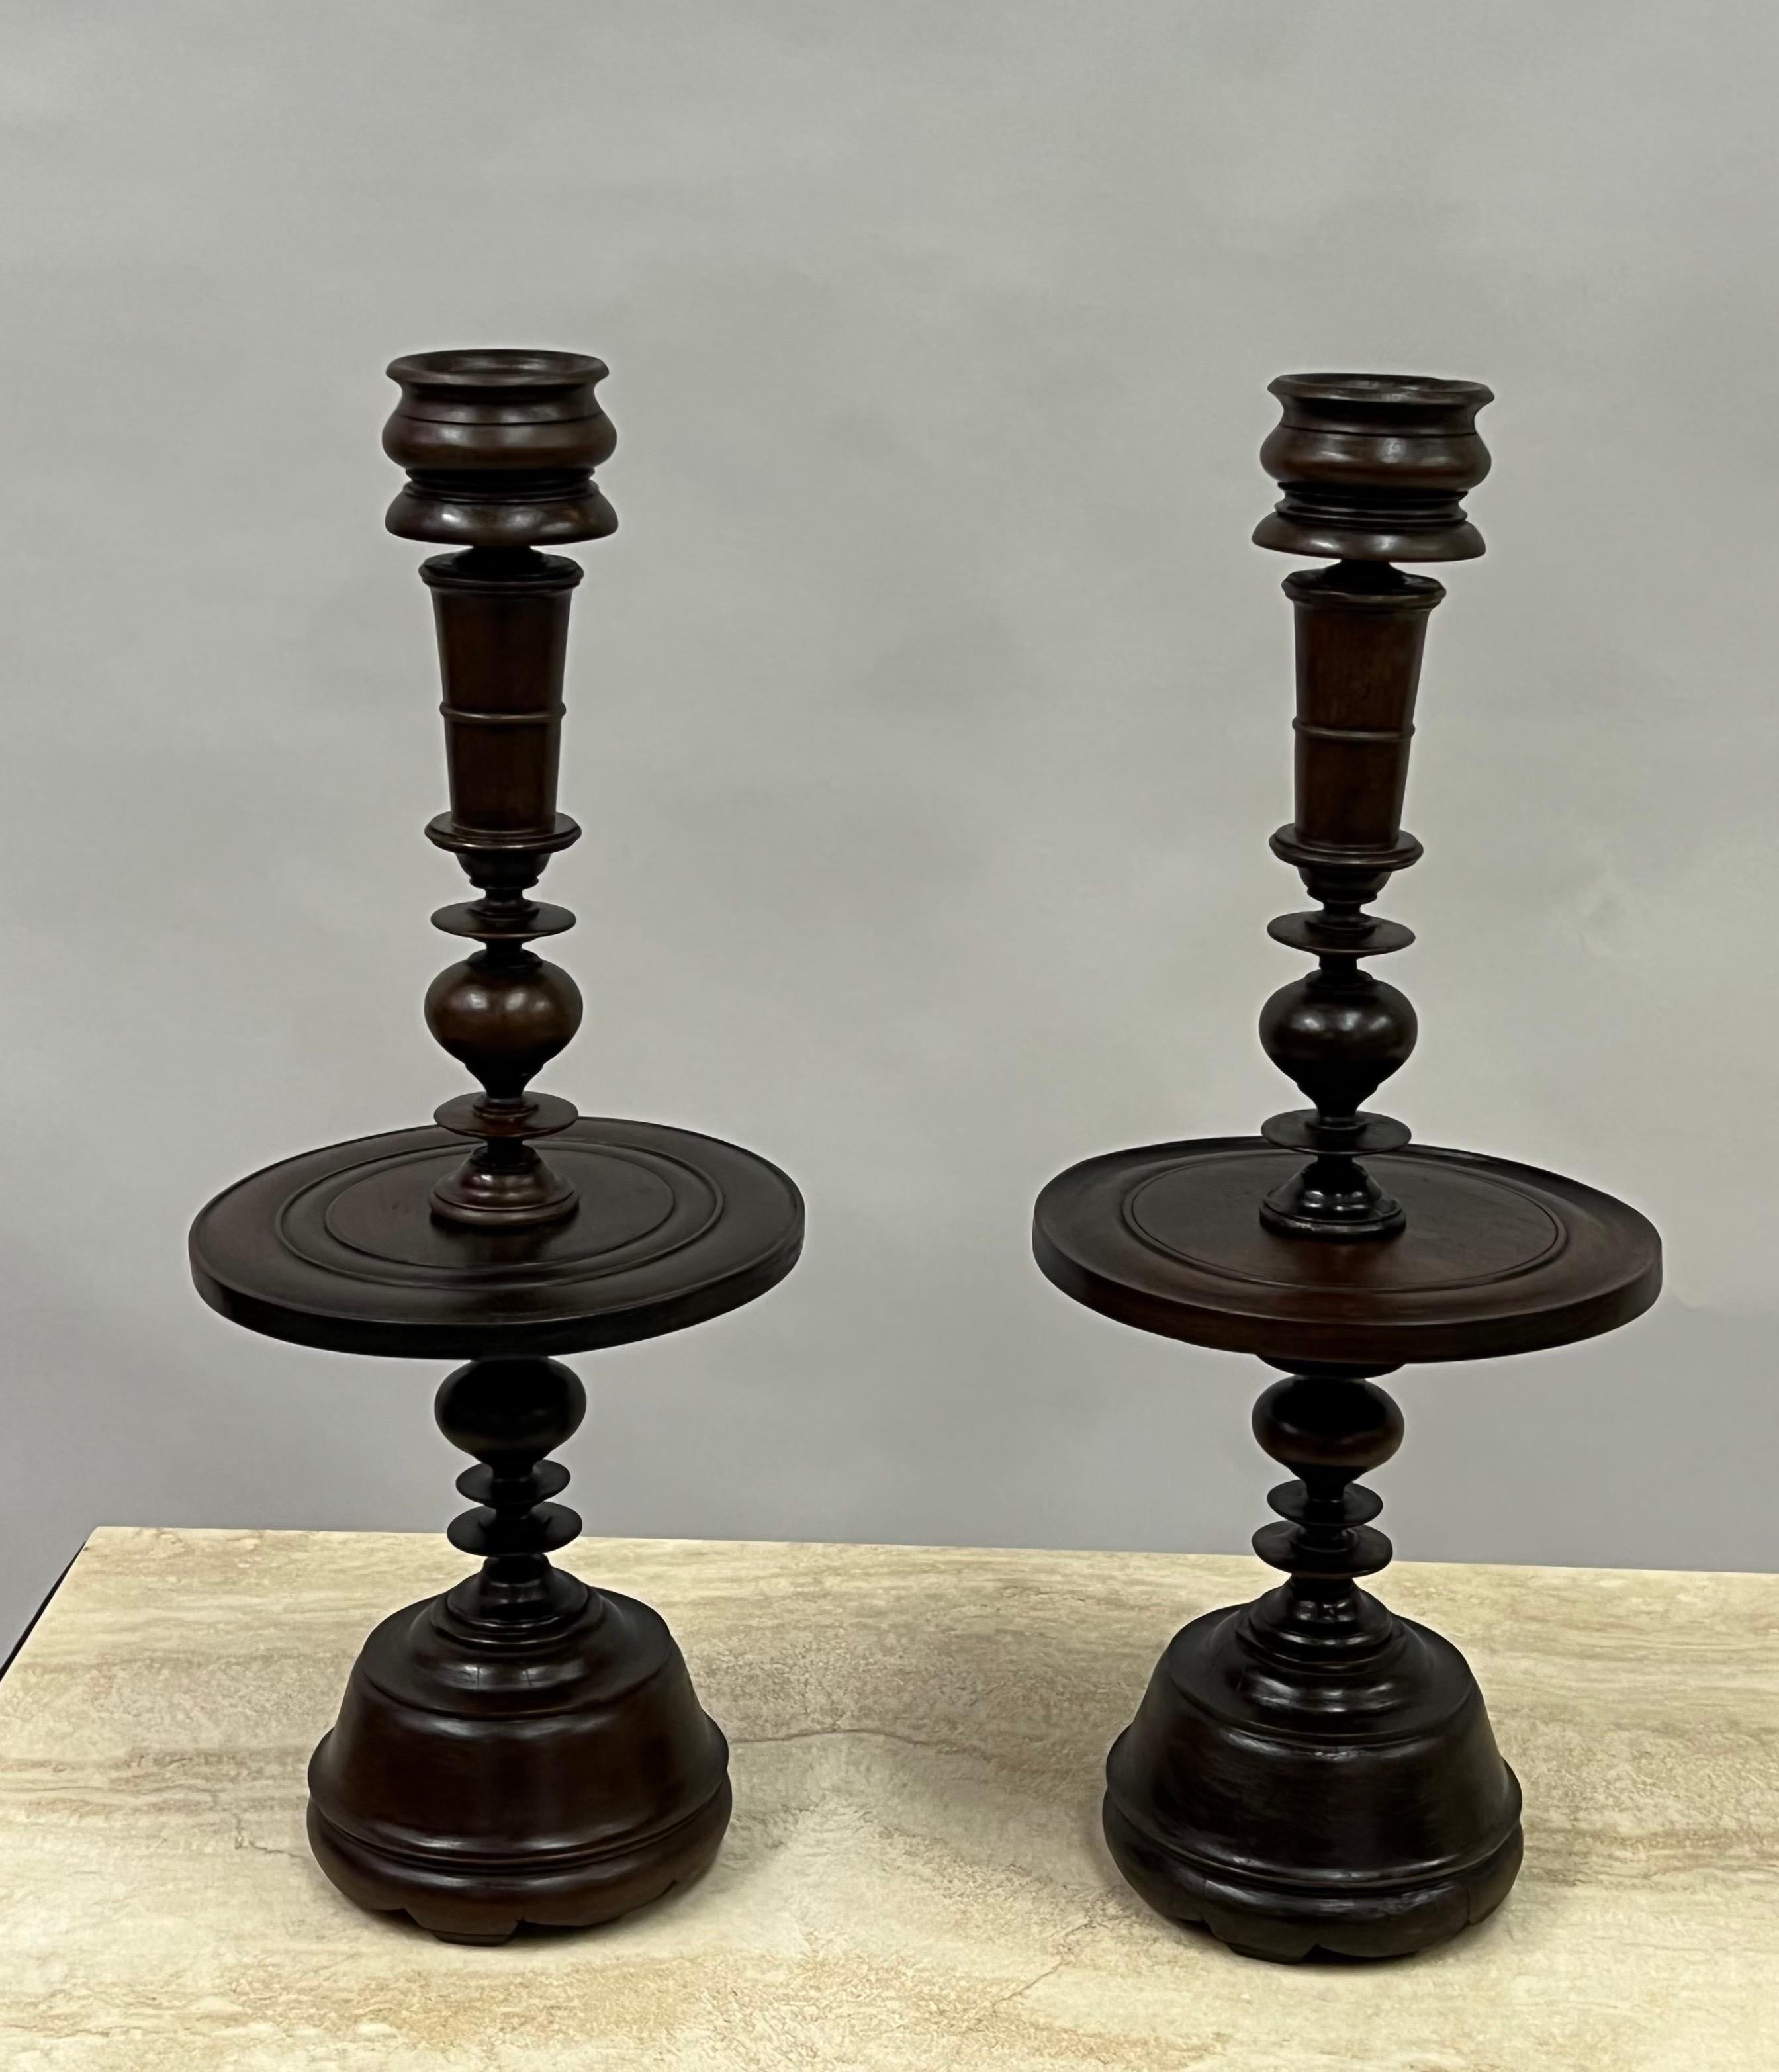 Rare, timeless and elegant pair of French Colonial table lamp bases or candelabras from the French colony of French Indochina also known a Indochine. The pieces are hand carved from Teak Wood into sumptuous forms and can be adapted to accommodate an